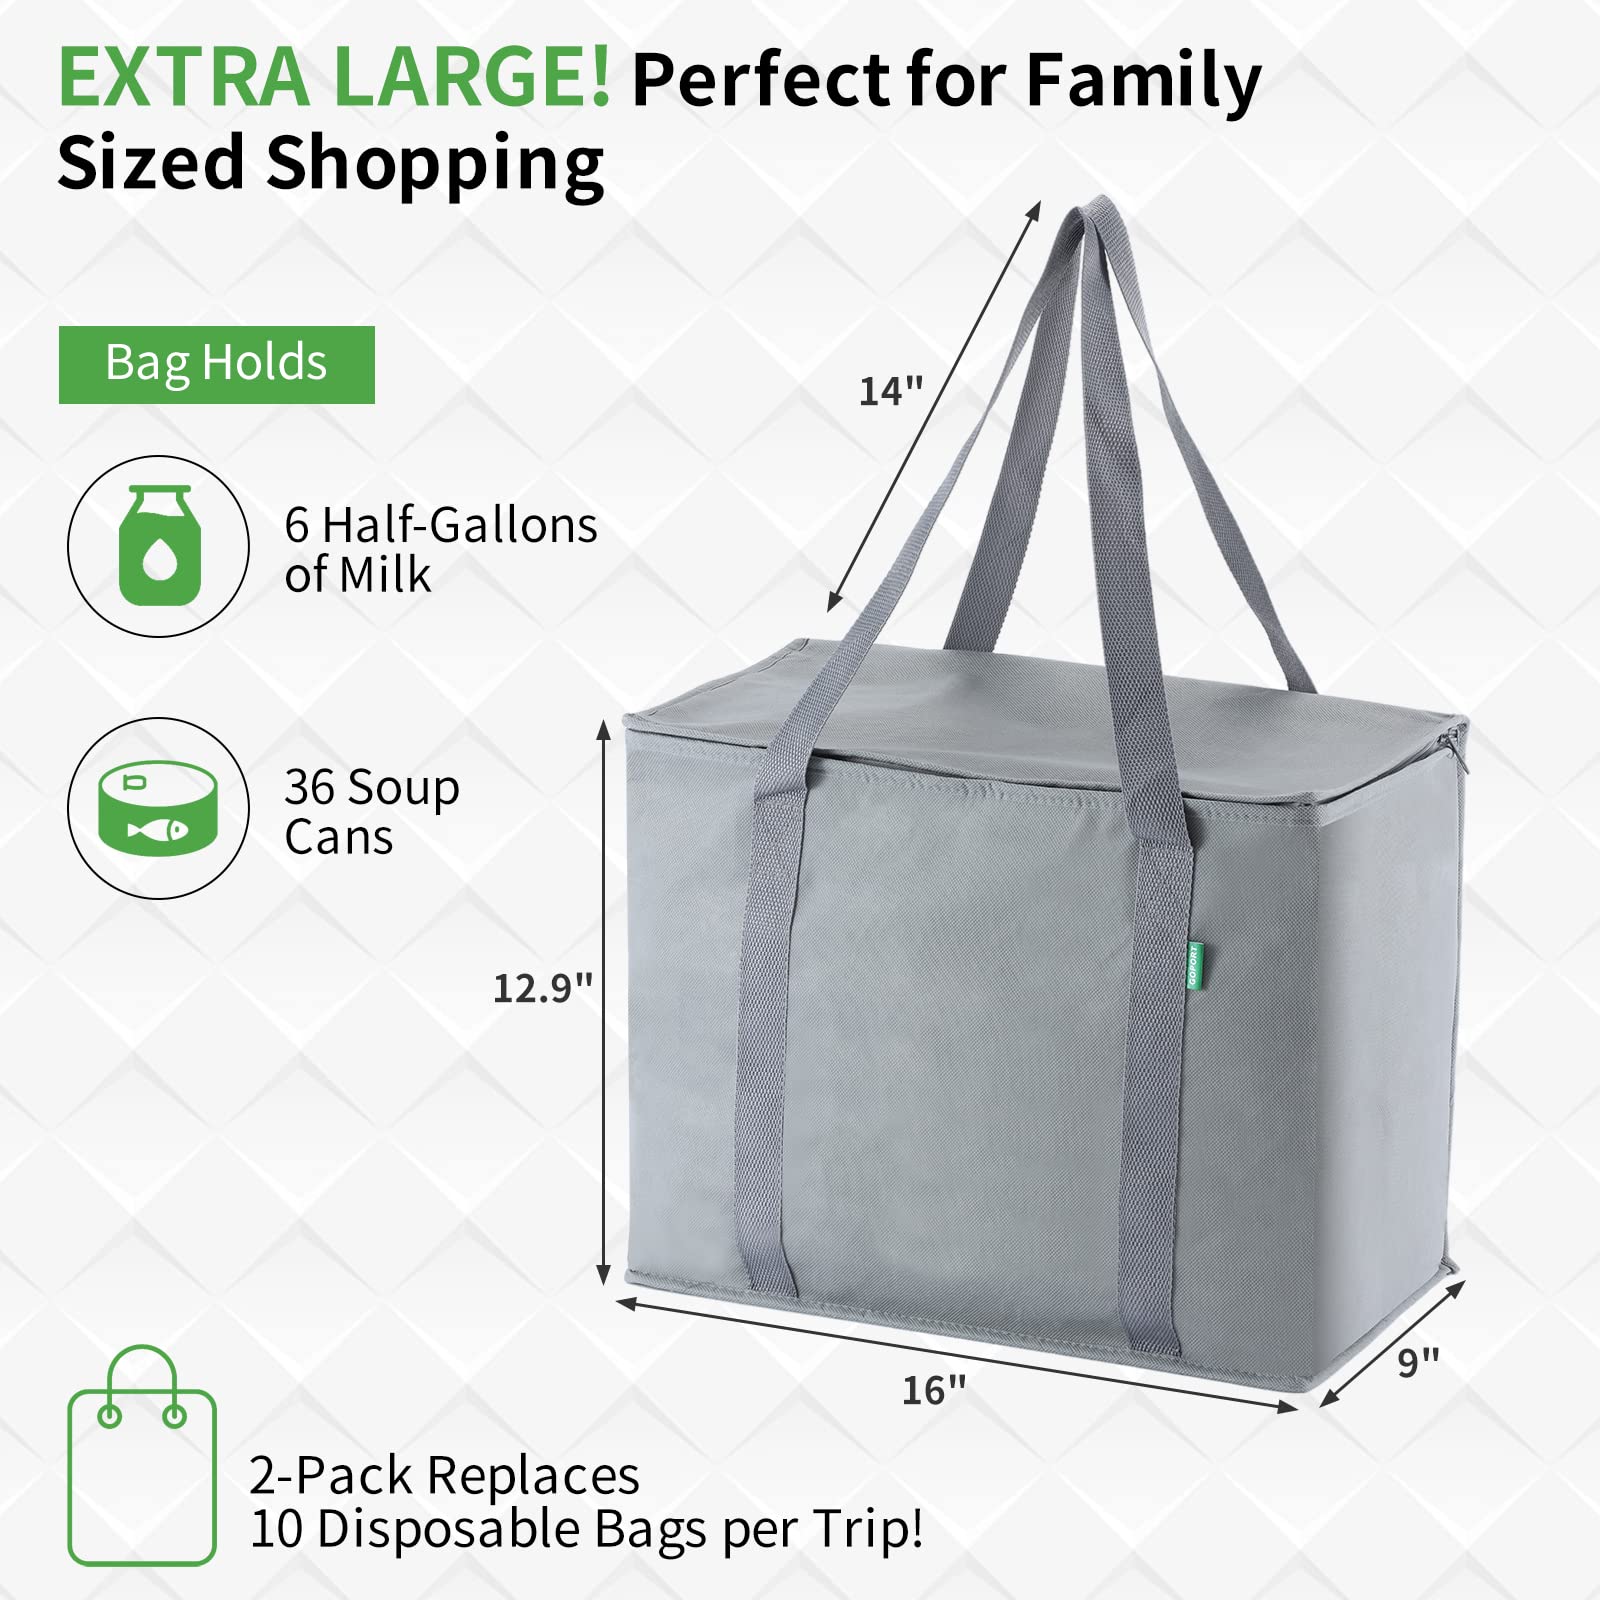 GOPORT 4pcs Insulated Reusable Grocery Shopping Bags, Heavy Duty Large Tote Bag Set with Extra Long Handles Thermal Lining Grocery Bags